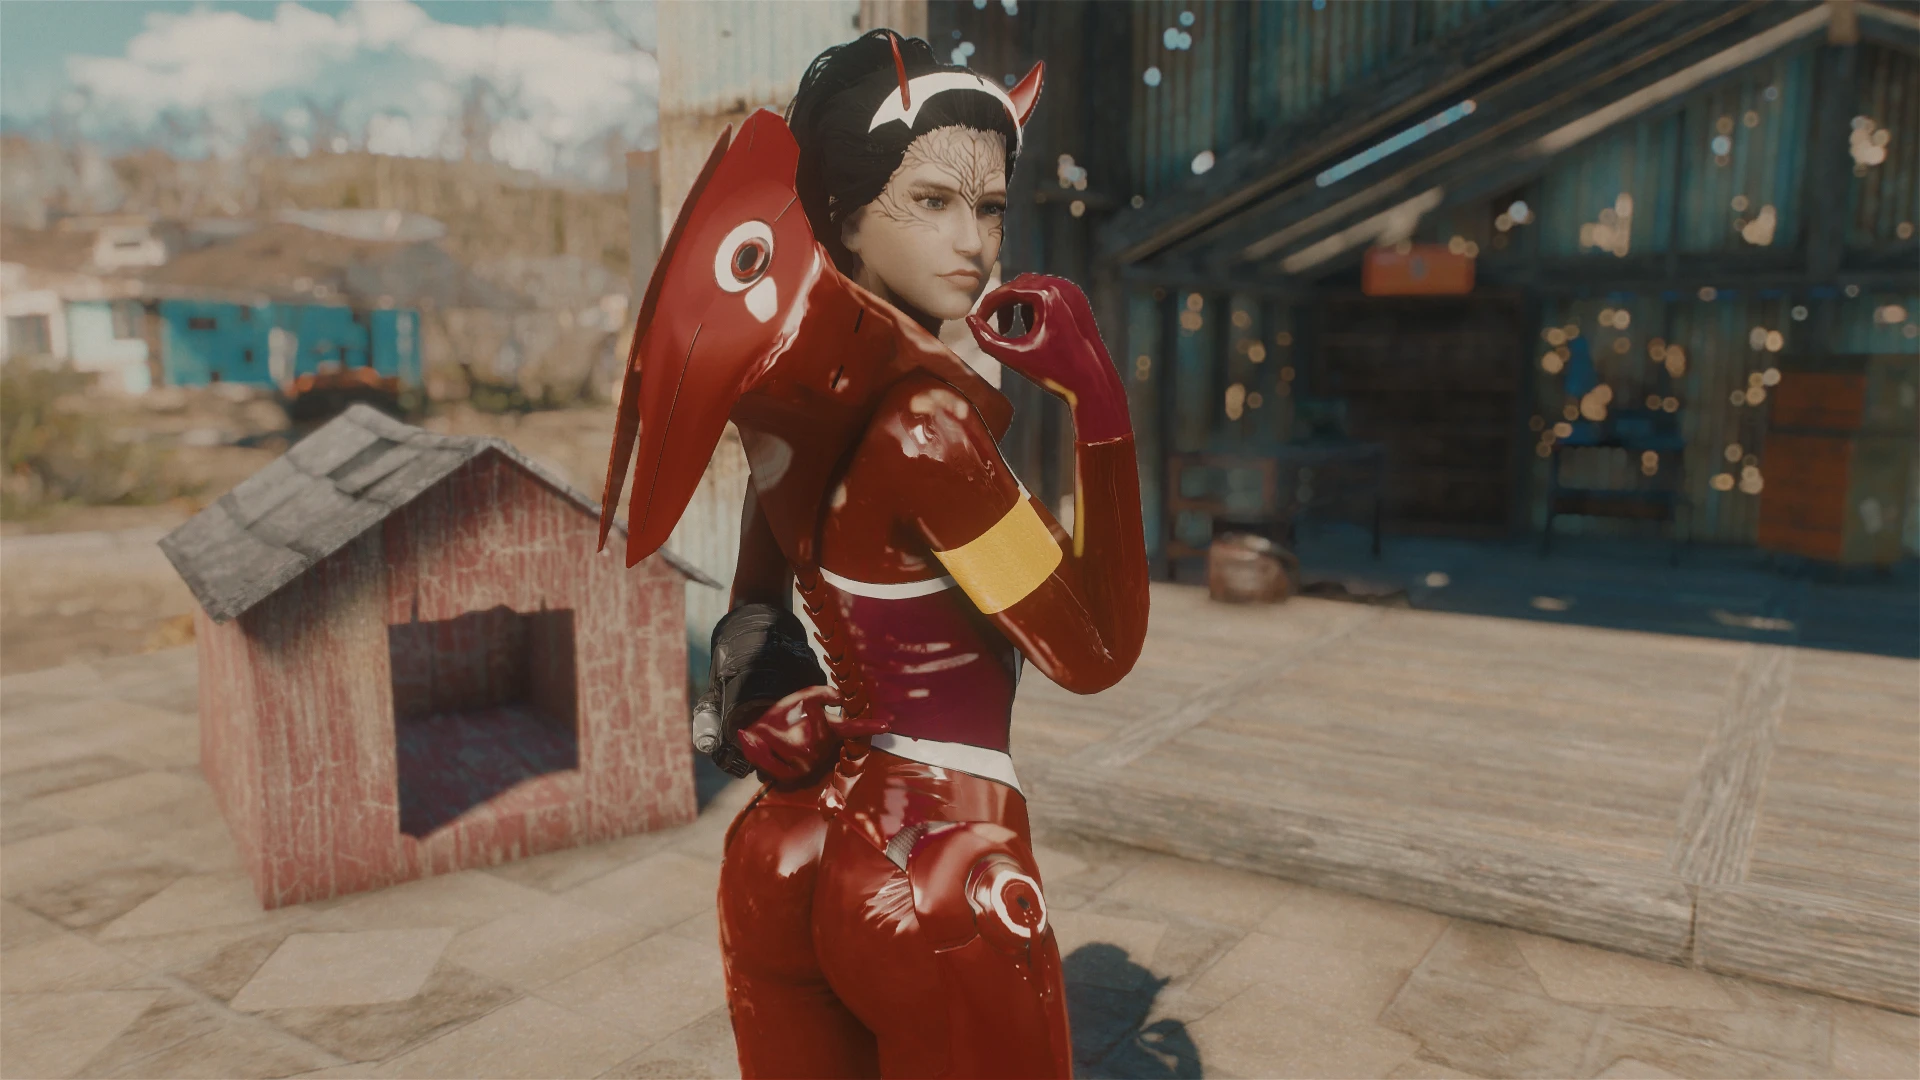 Grim Zerotwo Fusion Girl Bodyslide Conversion At Fallout 4 Nexus Mods And Community 